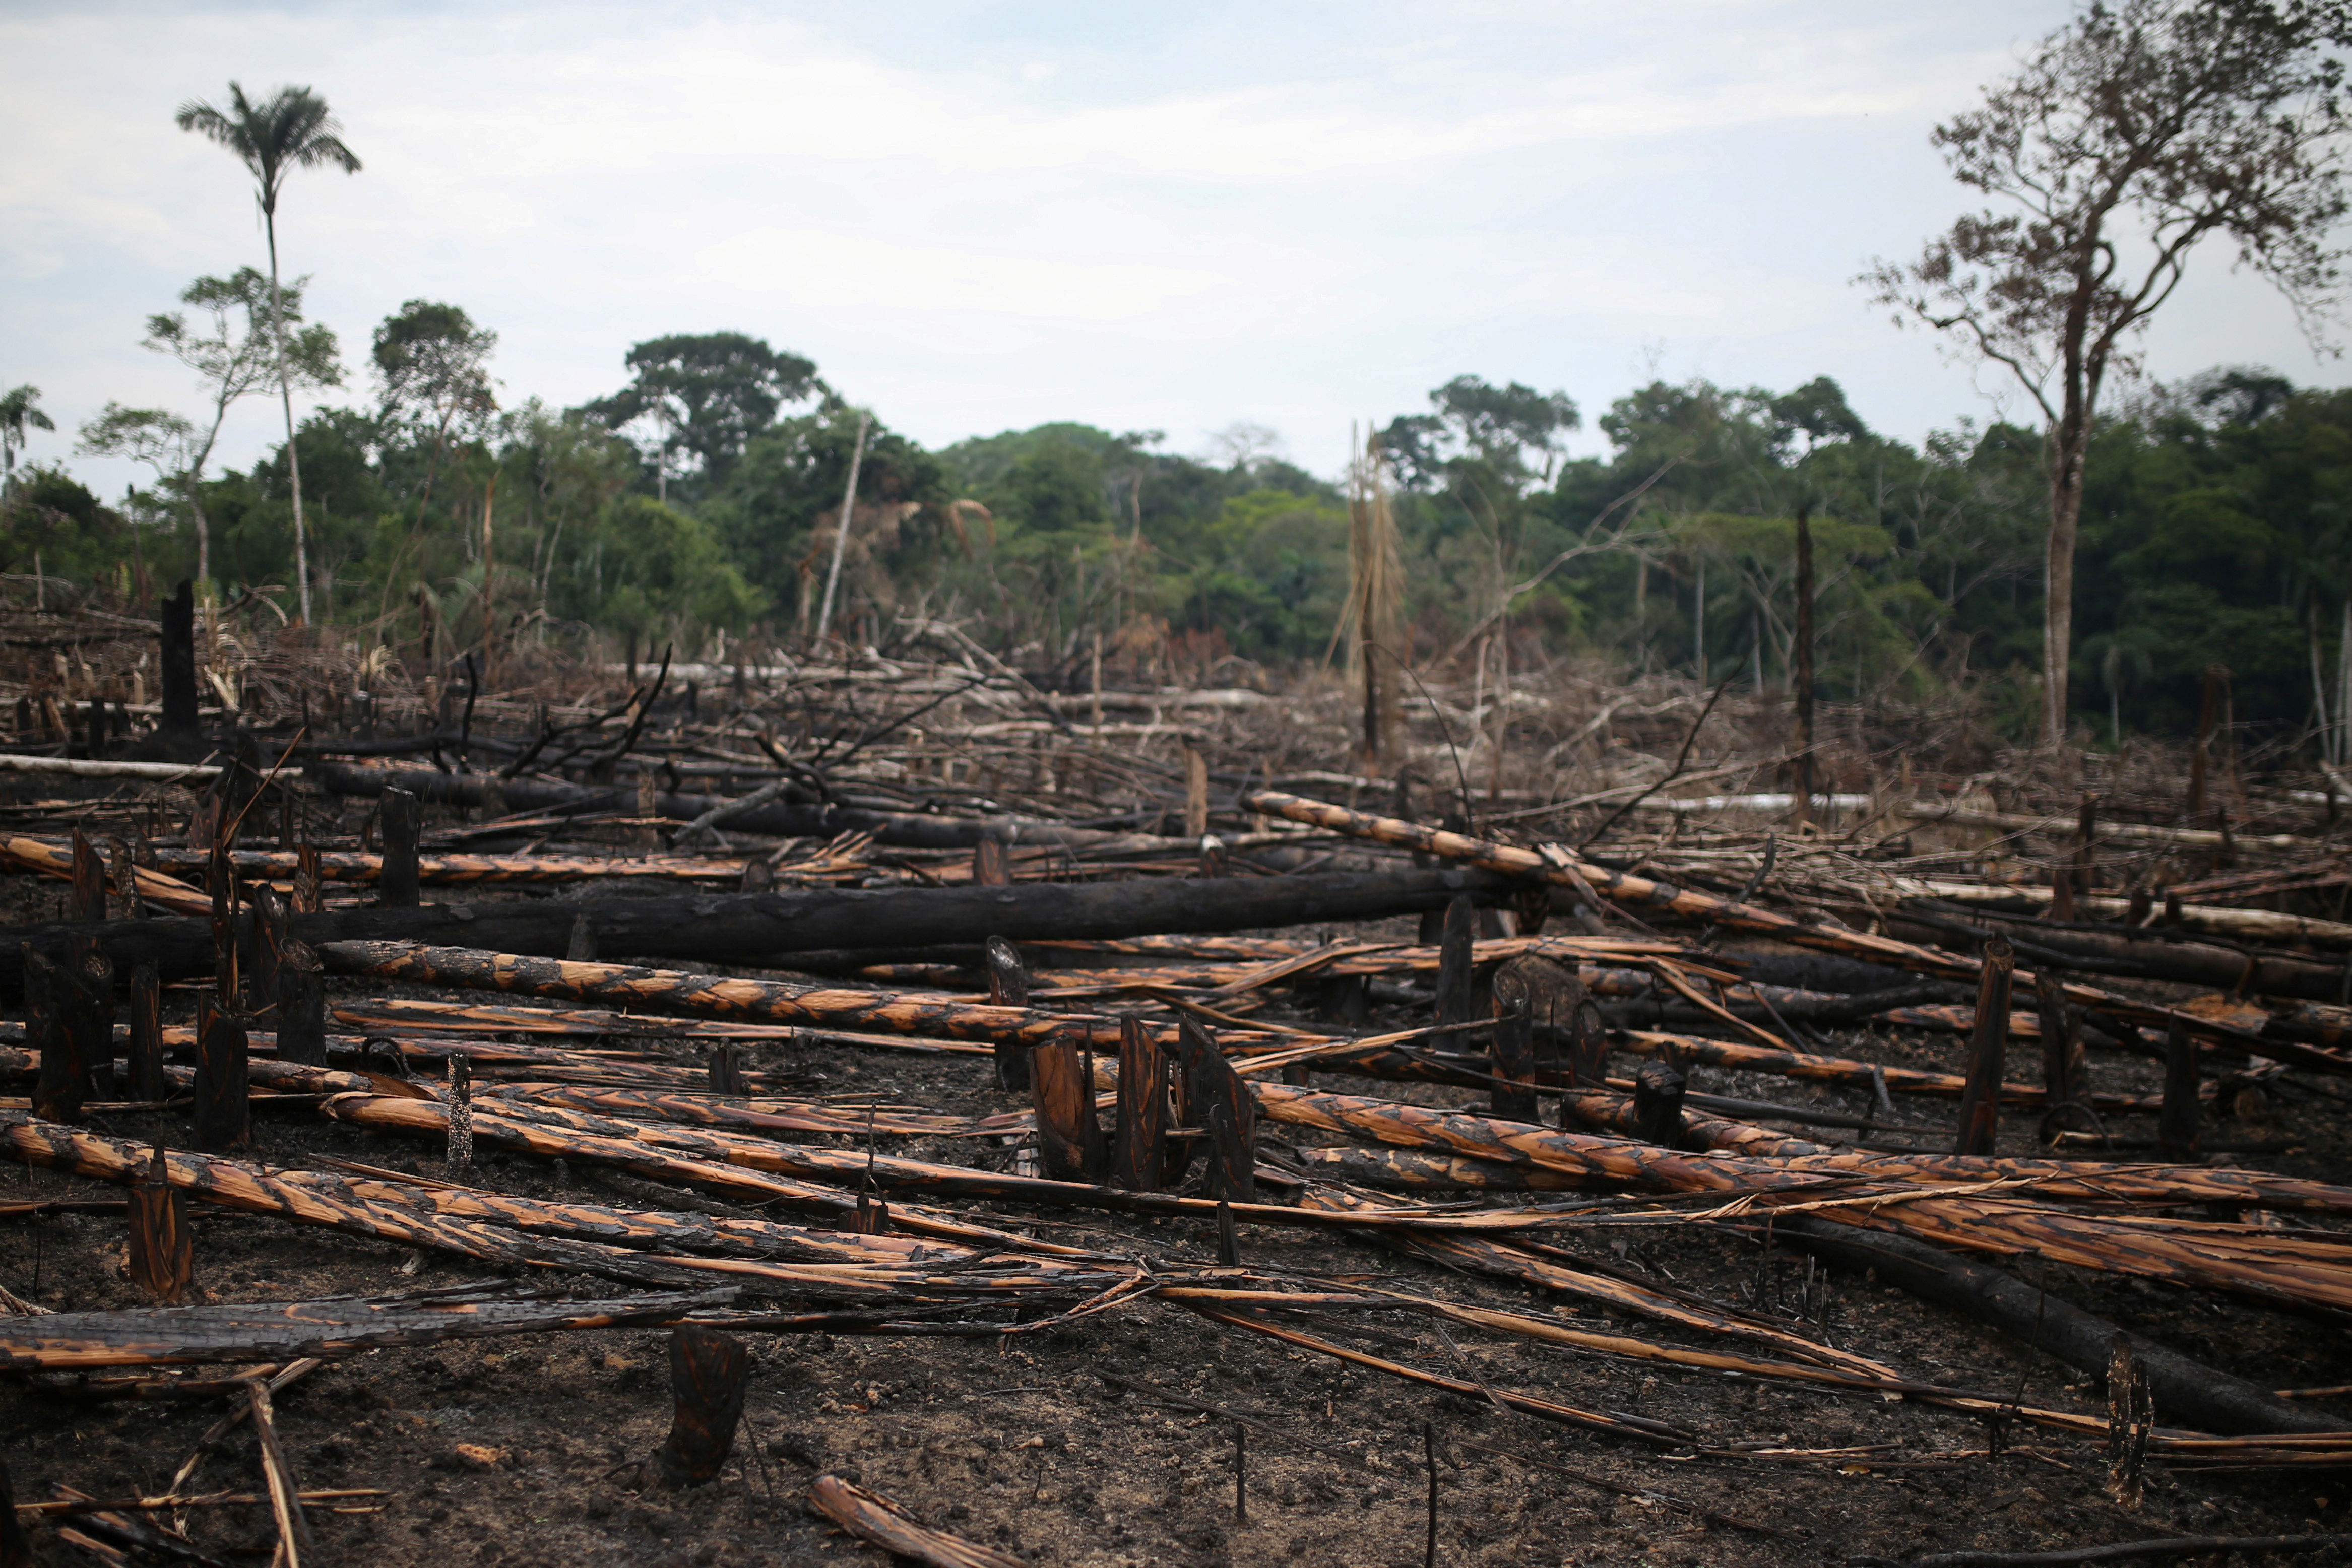 Charred logs are seen on a stretch of the Yari plains, which was recently burned for pasture, in Caqueta